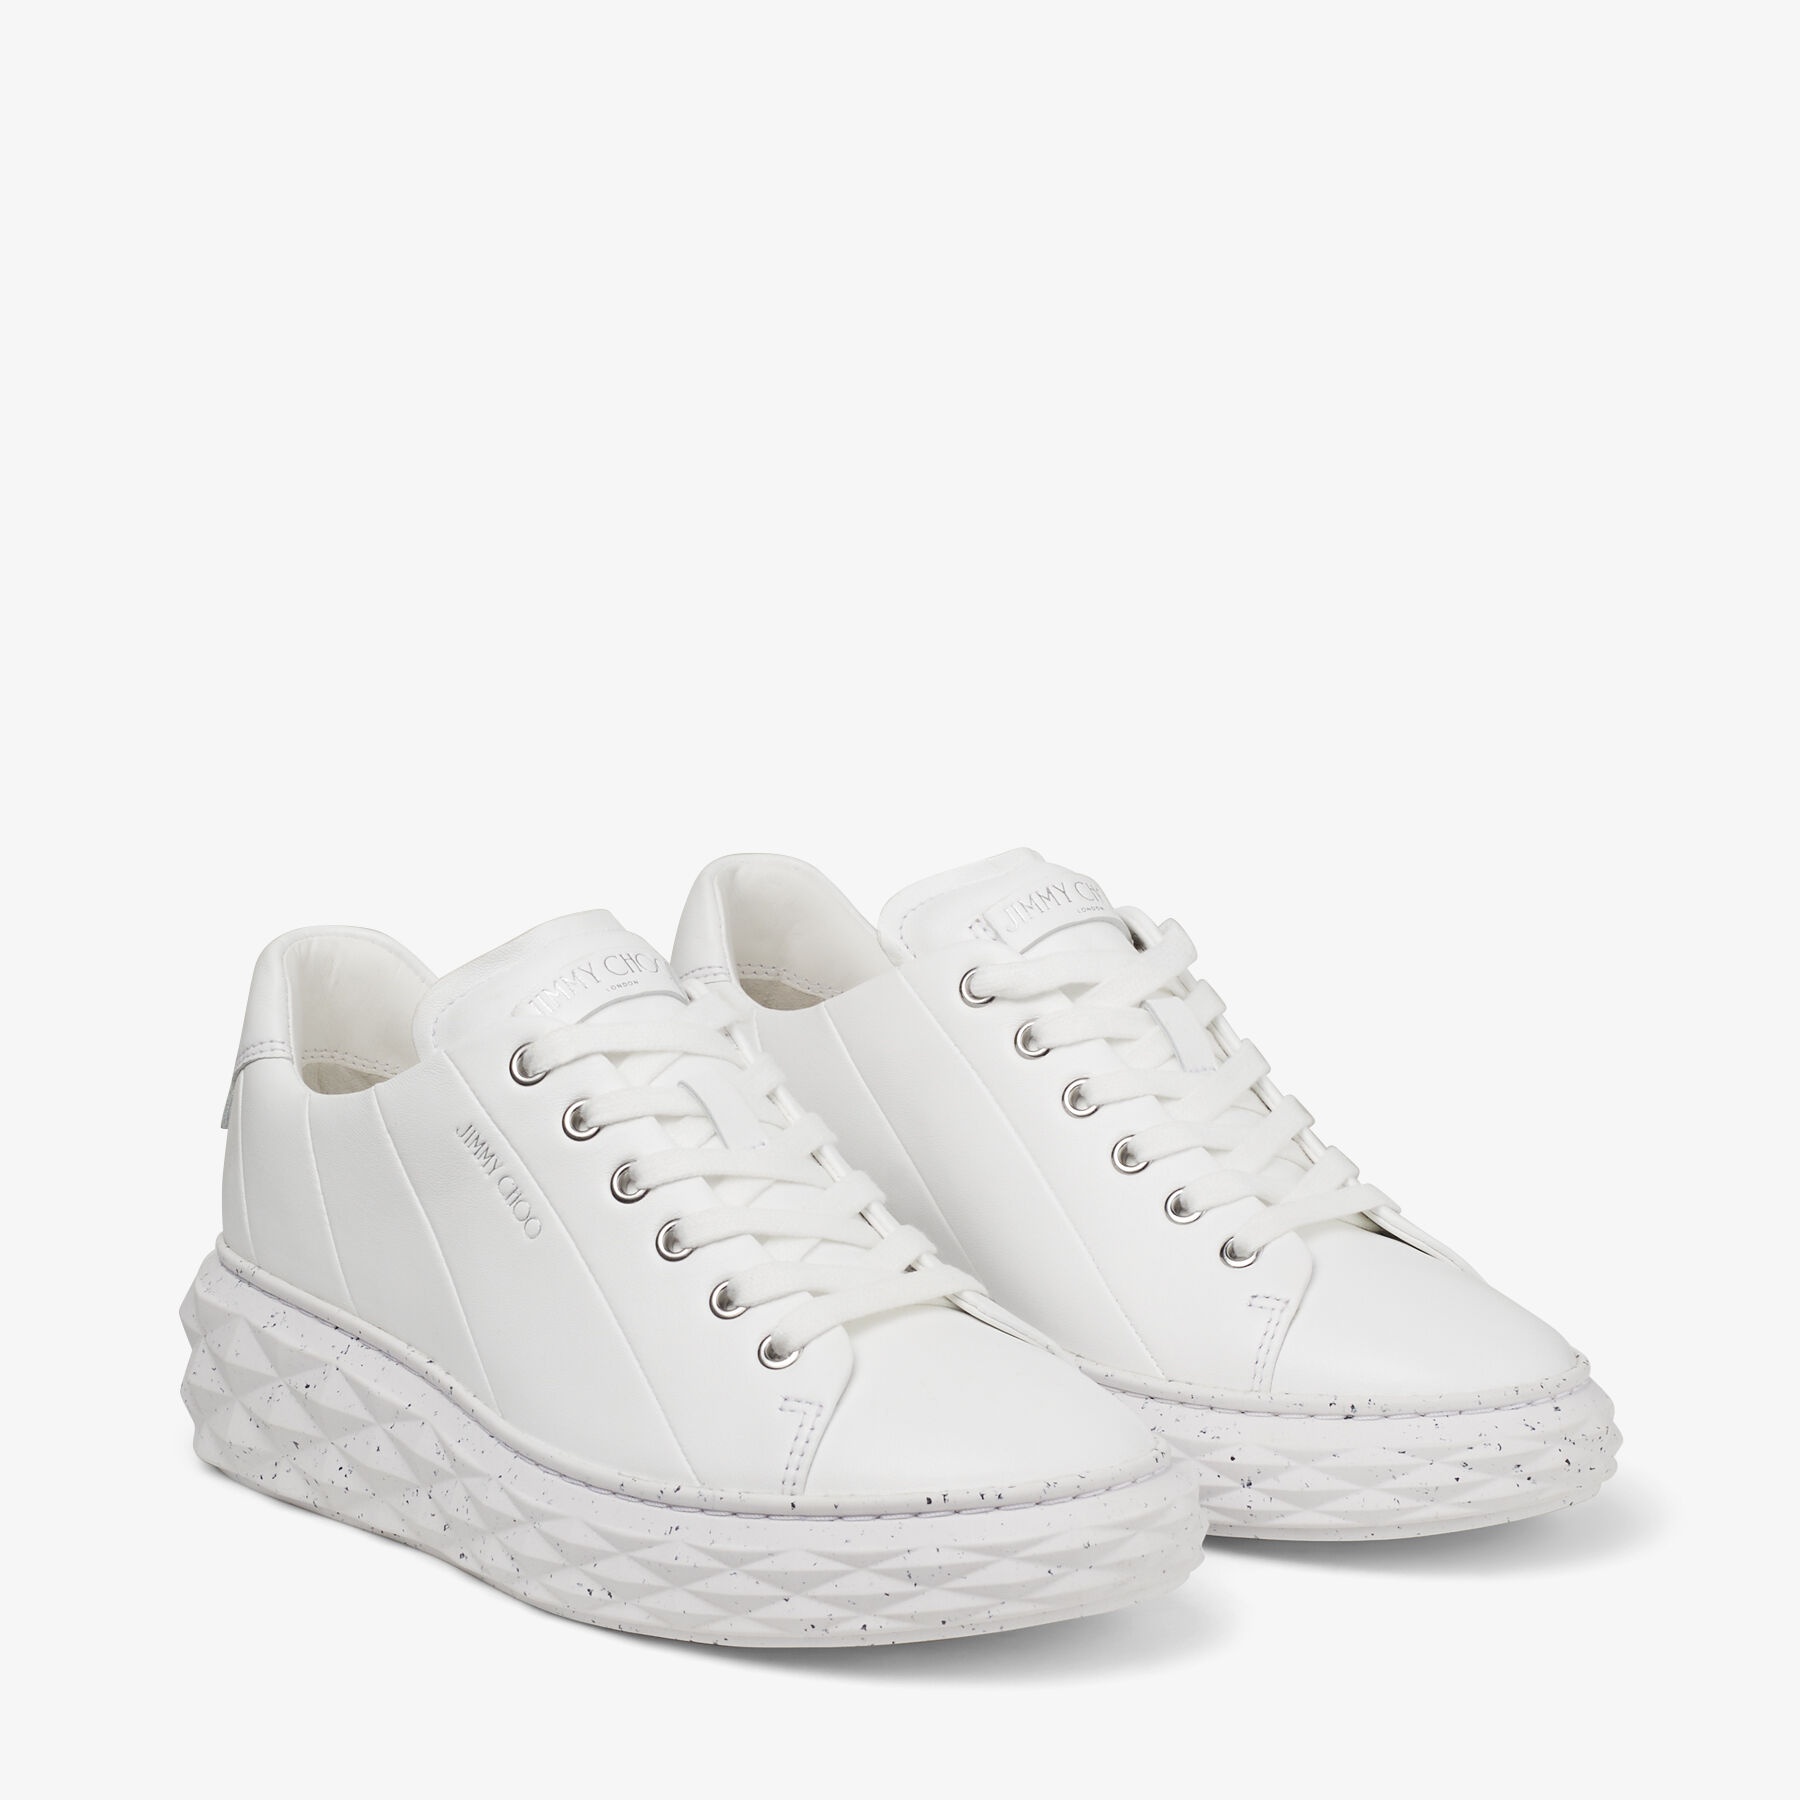 Diamond Light Maxi/F
White Nappa Leather Low-Top Trainers with Platform Sole - 3